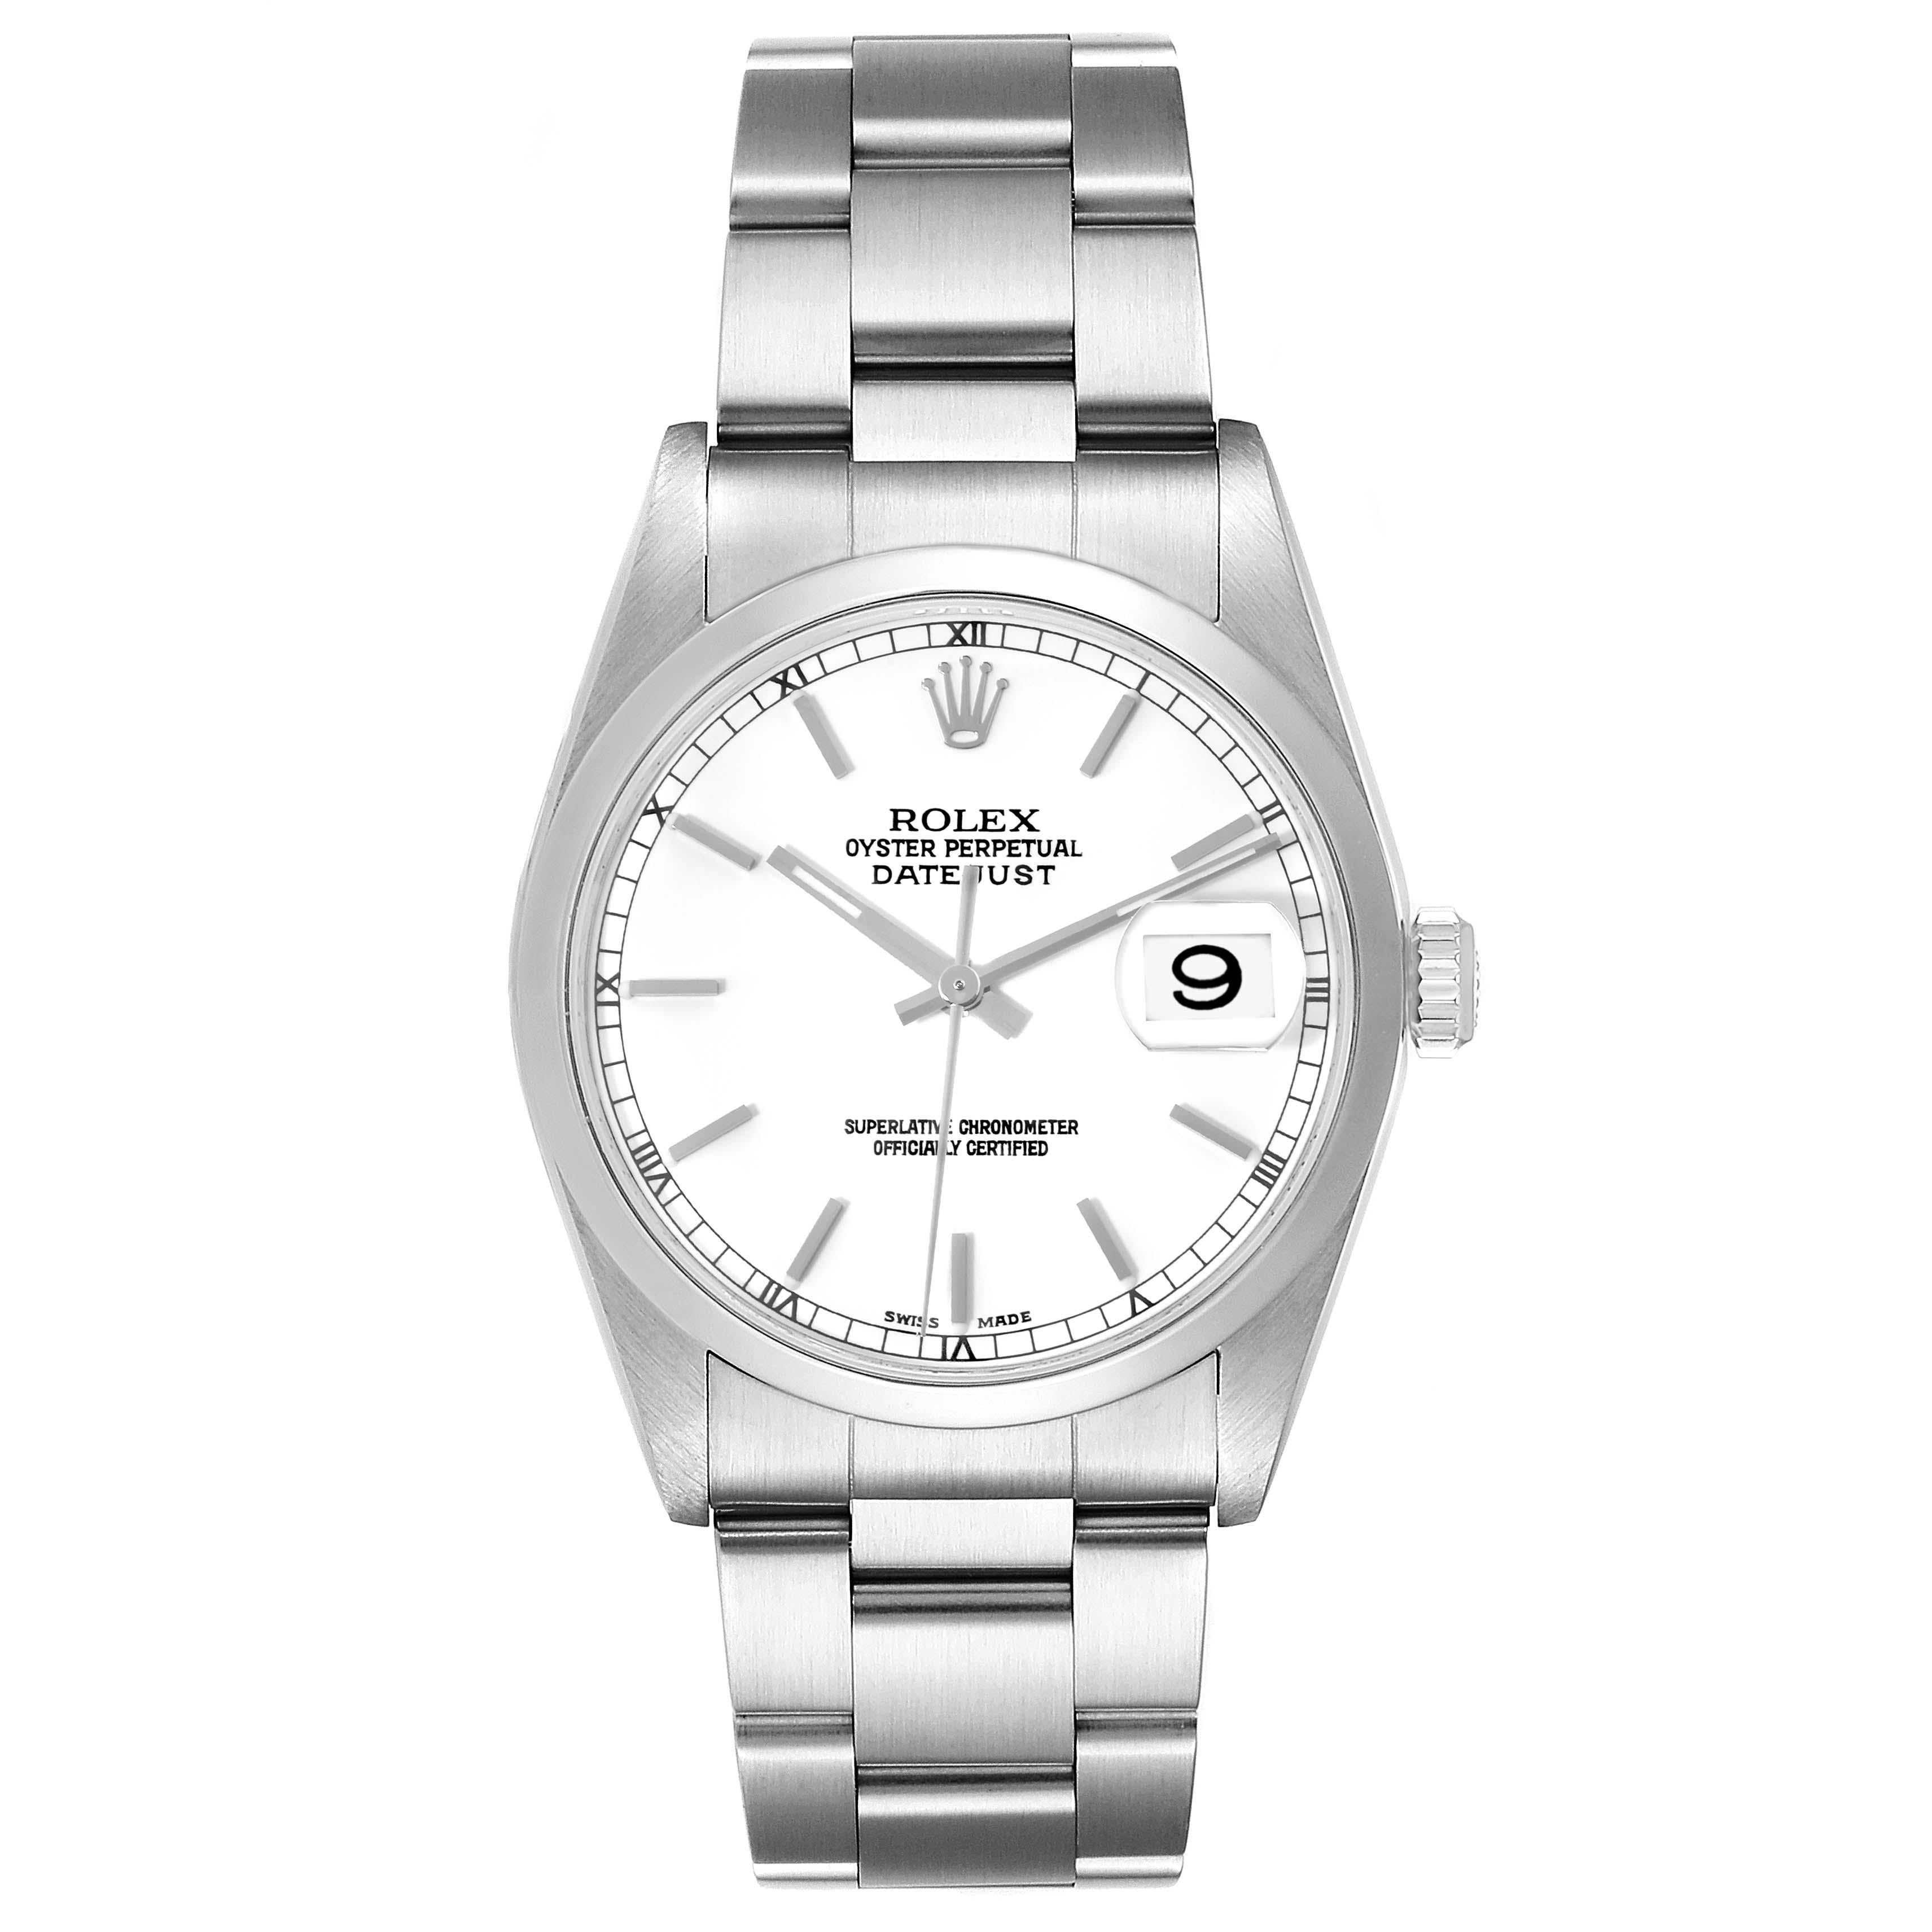 Rolex Datejust White Dial Smooth Bezel Steel Mens Watch 16200. Officially certified chronometer automatic self-winding movement with quickset date function. Stainless steel oyster case 36mm in diameter. Rolex logo on the crown. Stainless steel